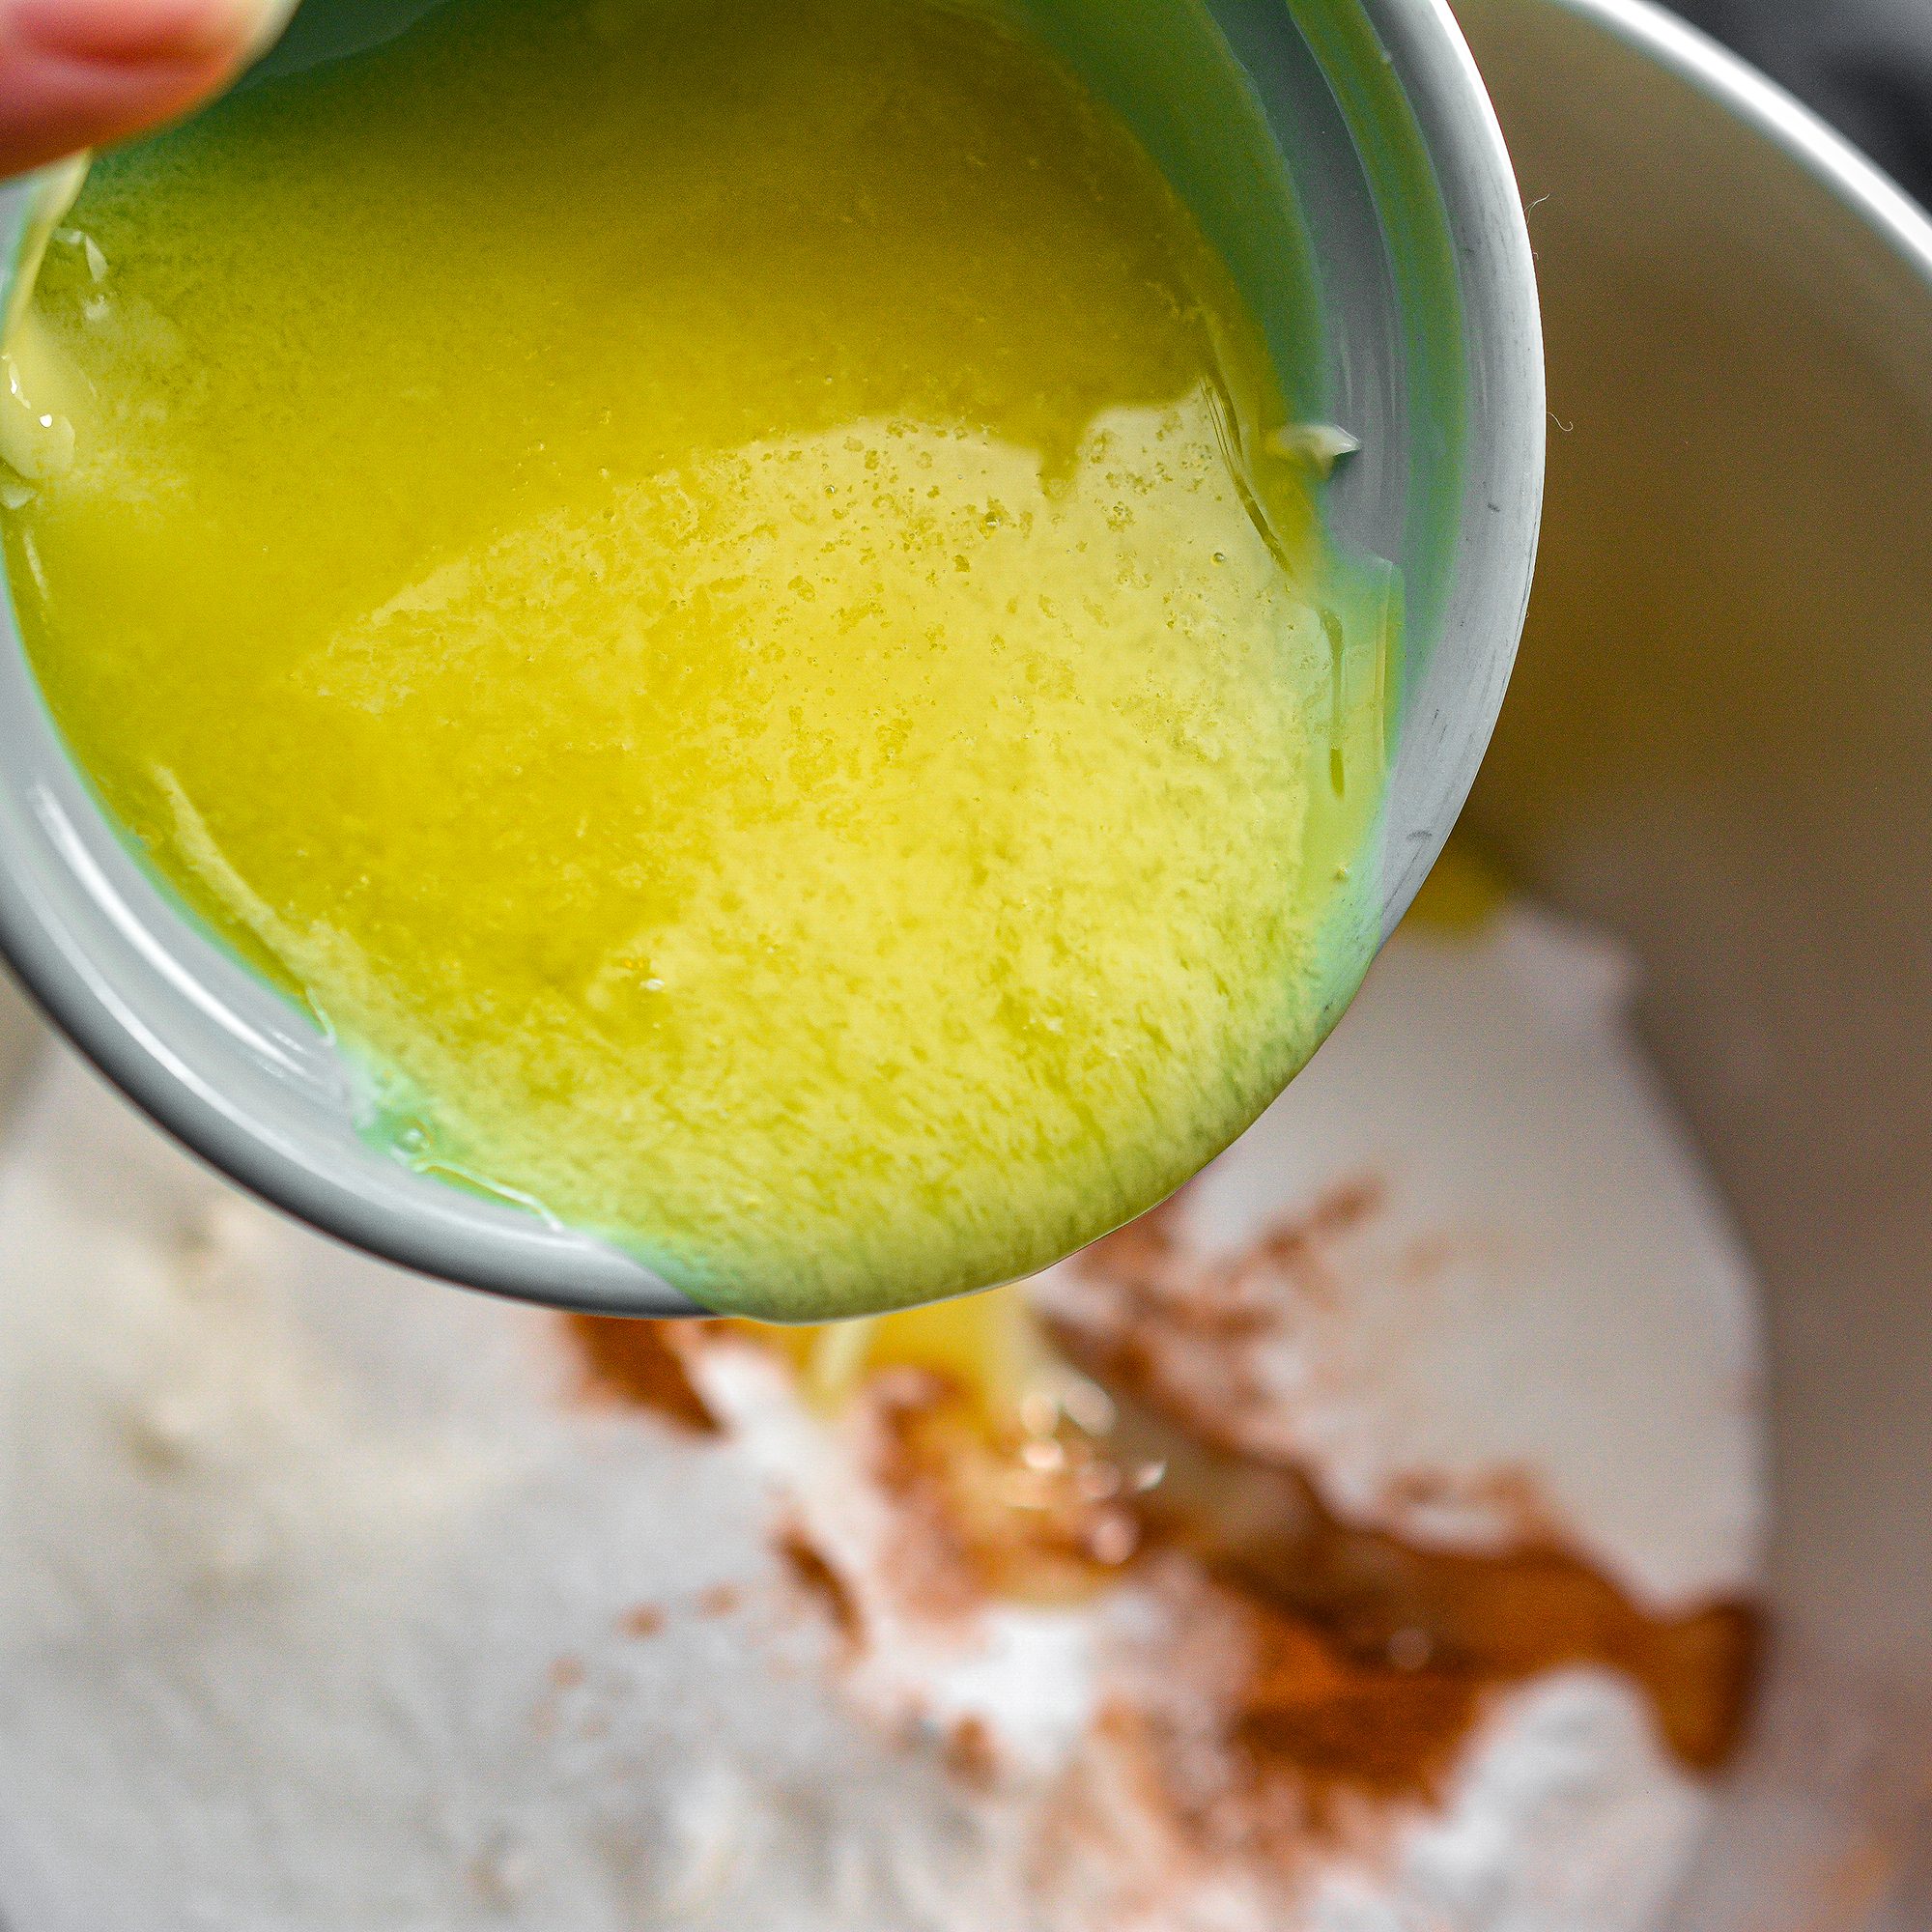 Mix together the flour, sugar, salt, baking soda, ground cinnamon, melted butter and eggs.